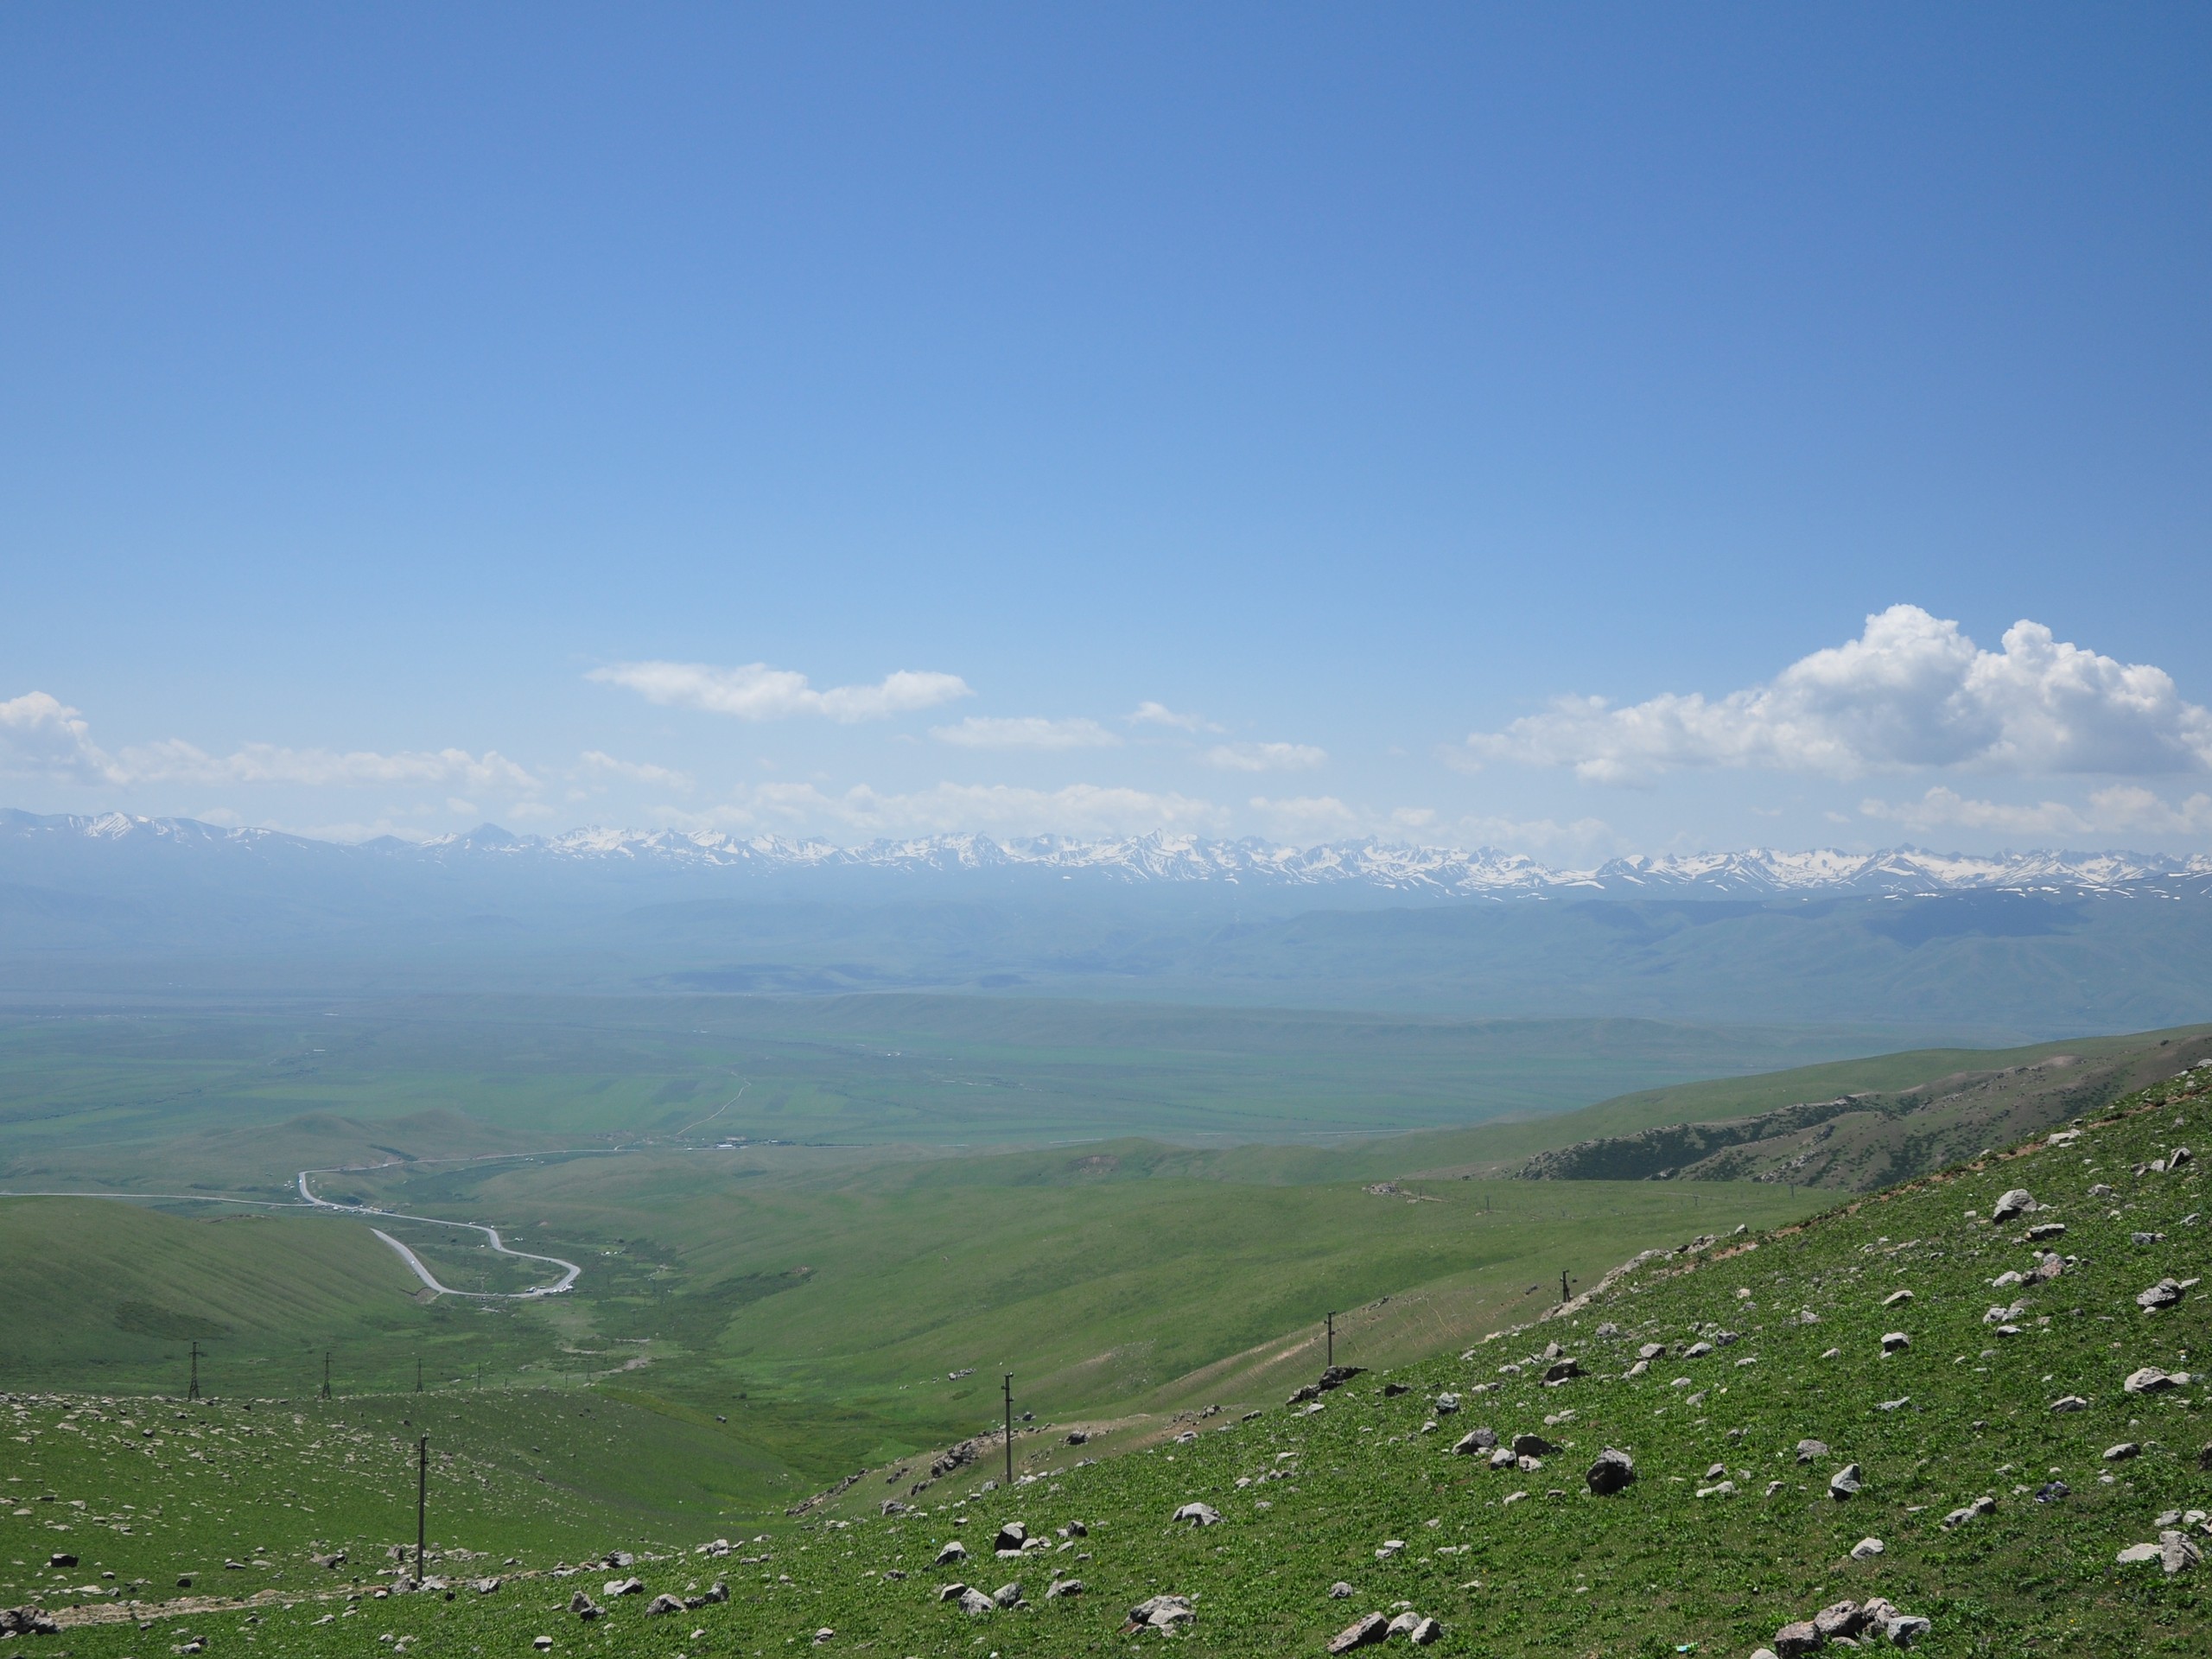 Looking at remote mountains in northern Kyrgyzstan